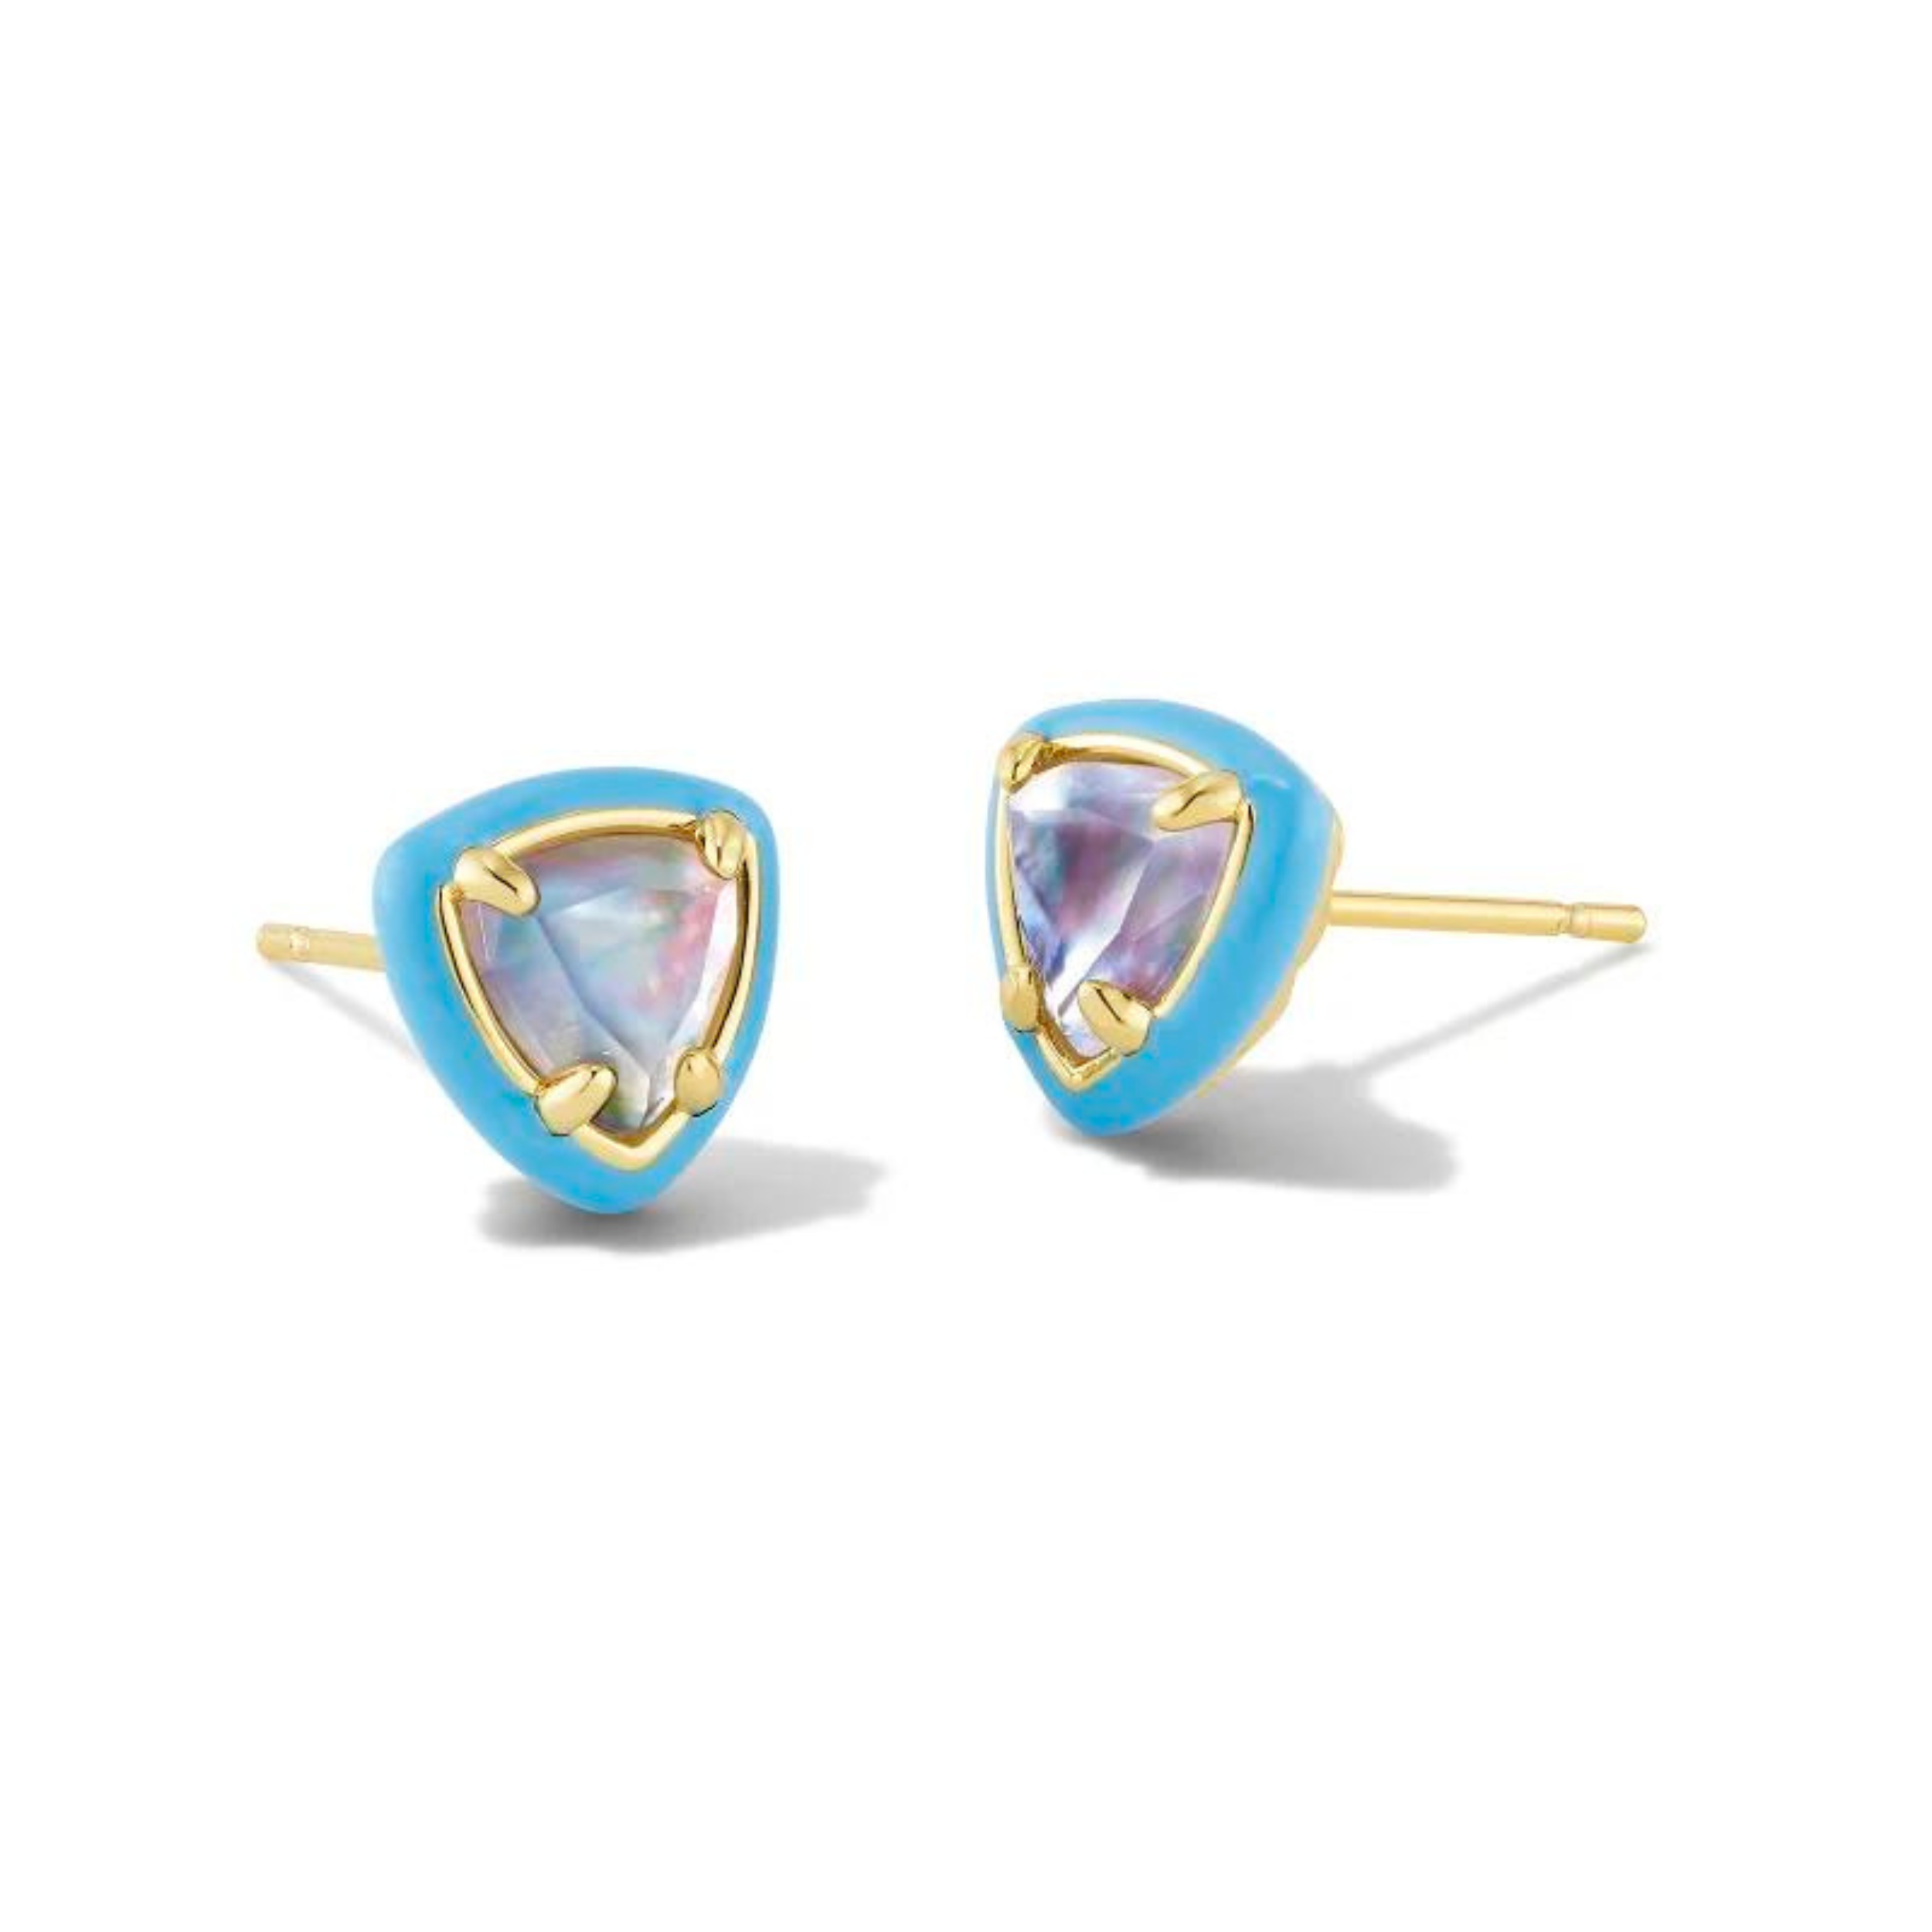 Light blue framed earrings with a center stone and a gold ear post. These earrings are pictured on a white background. 